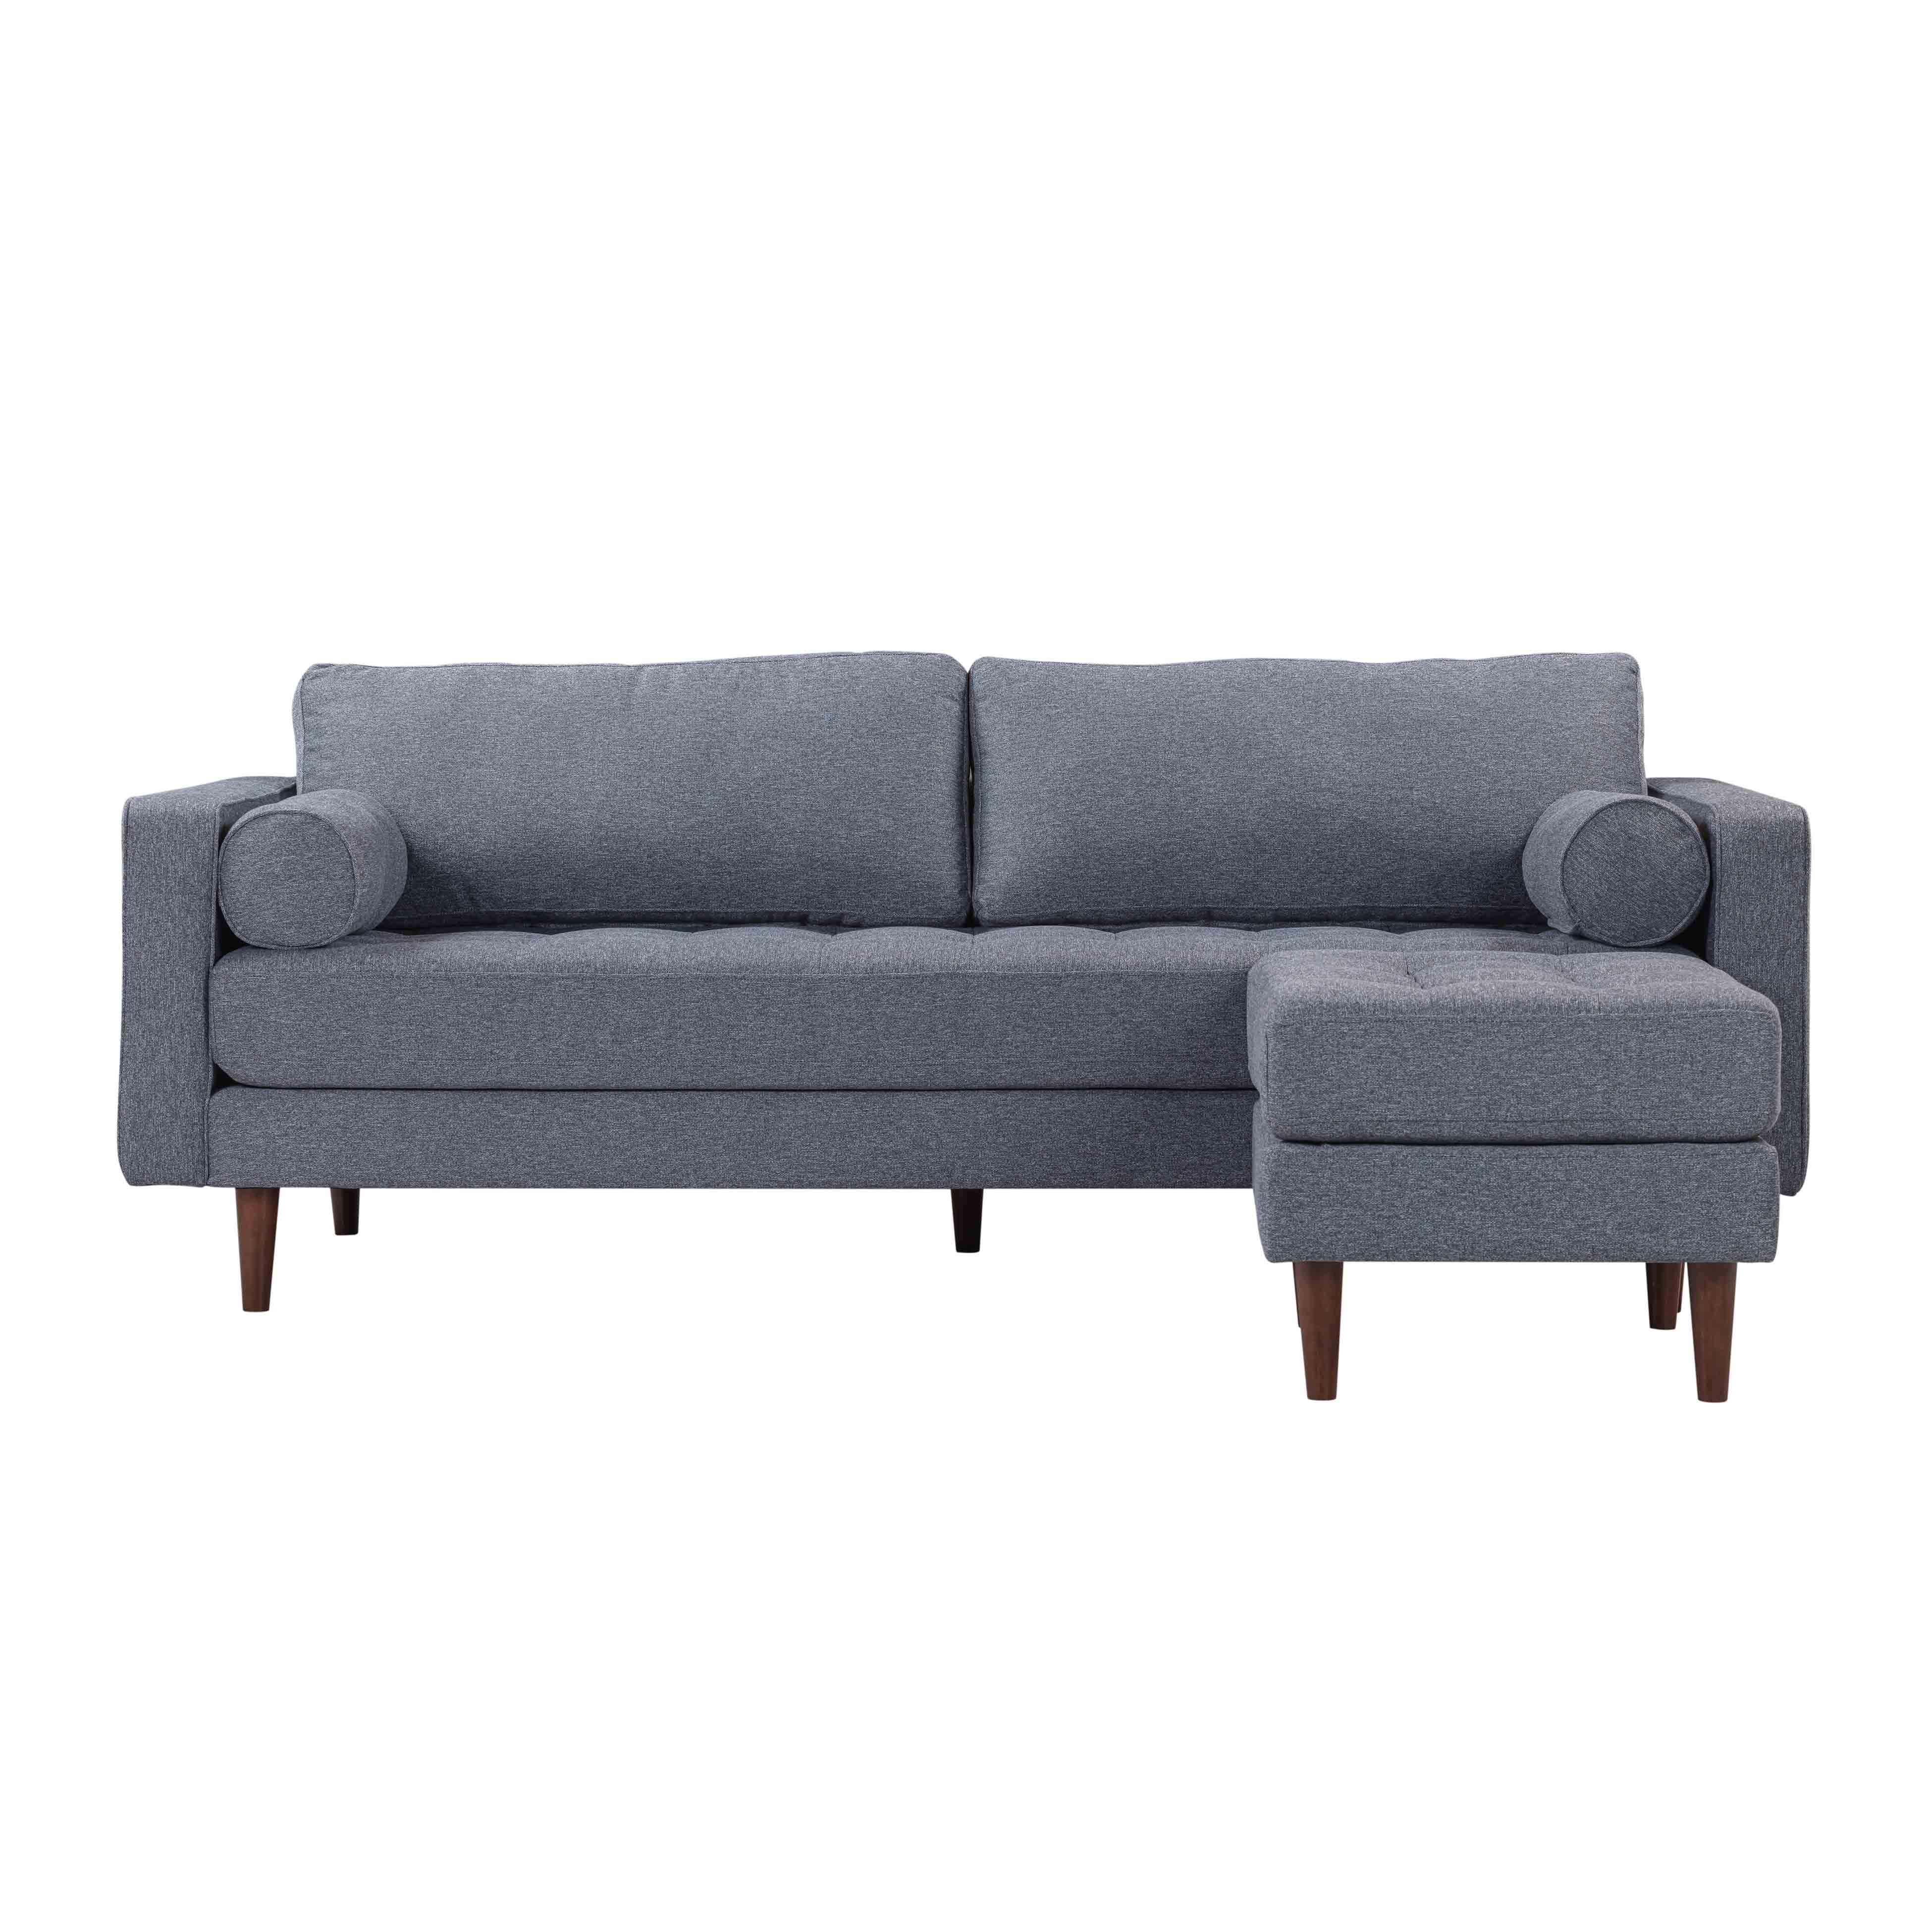 CAVE GRAY TWEED SECTIONAL